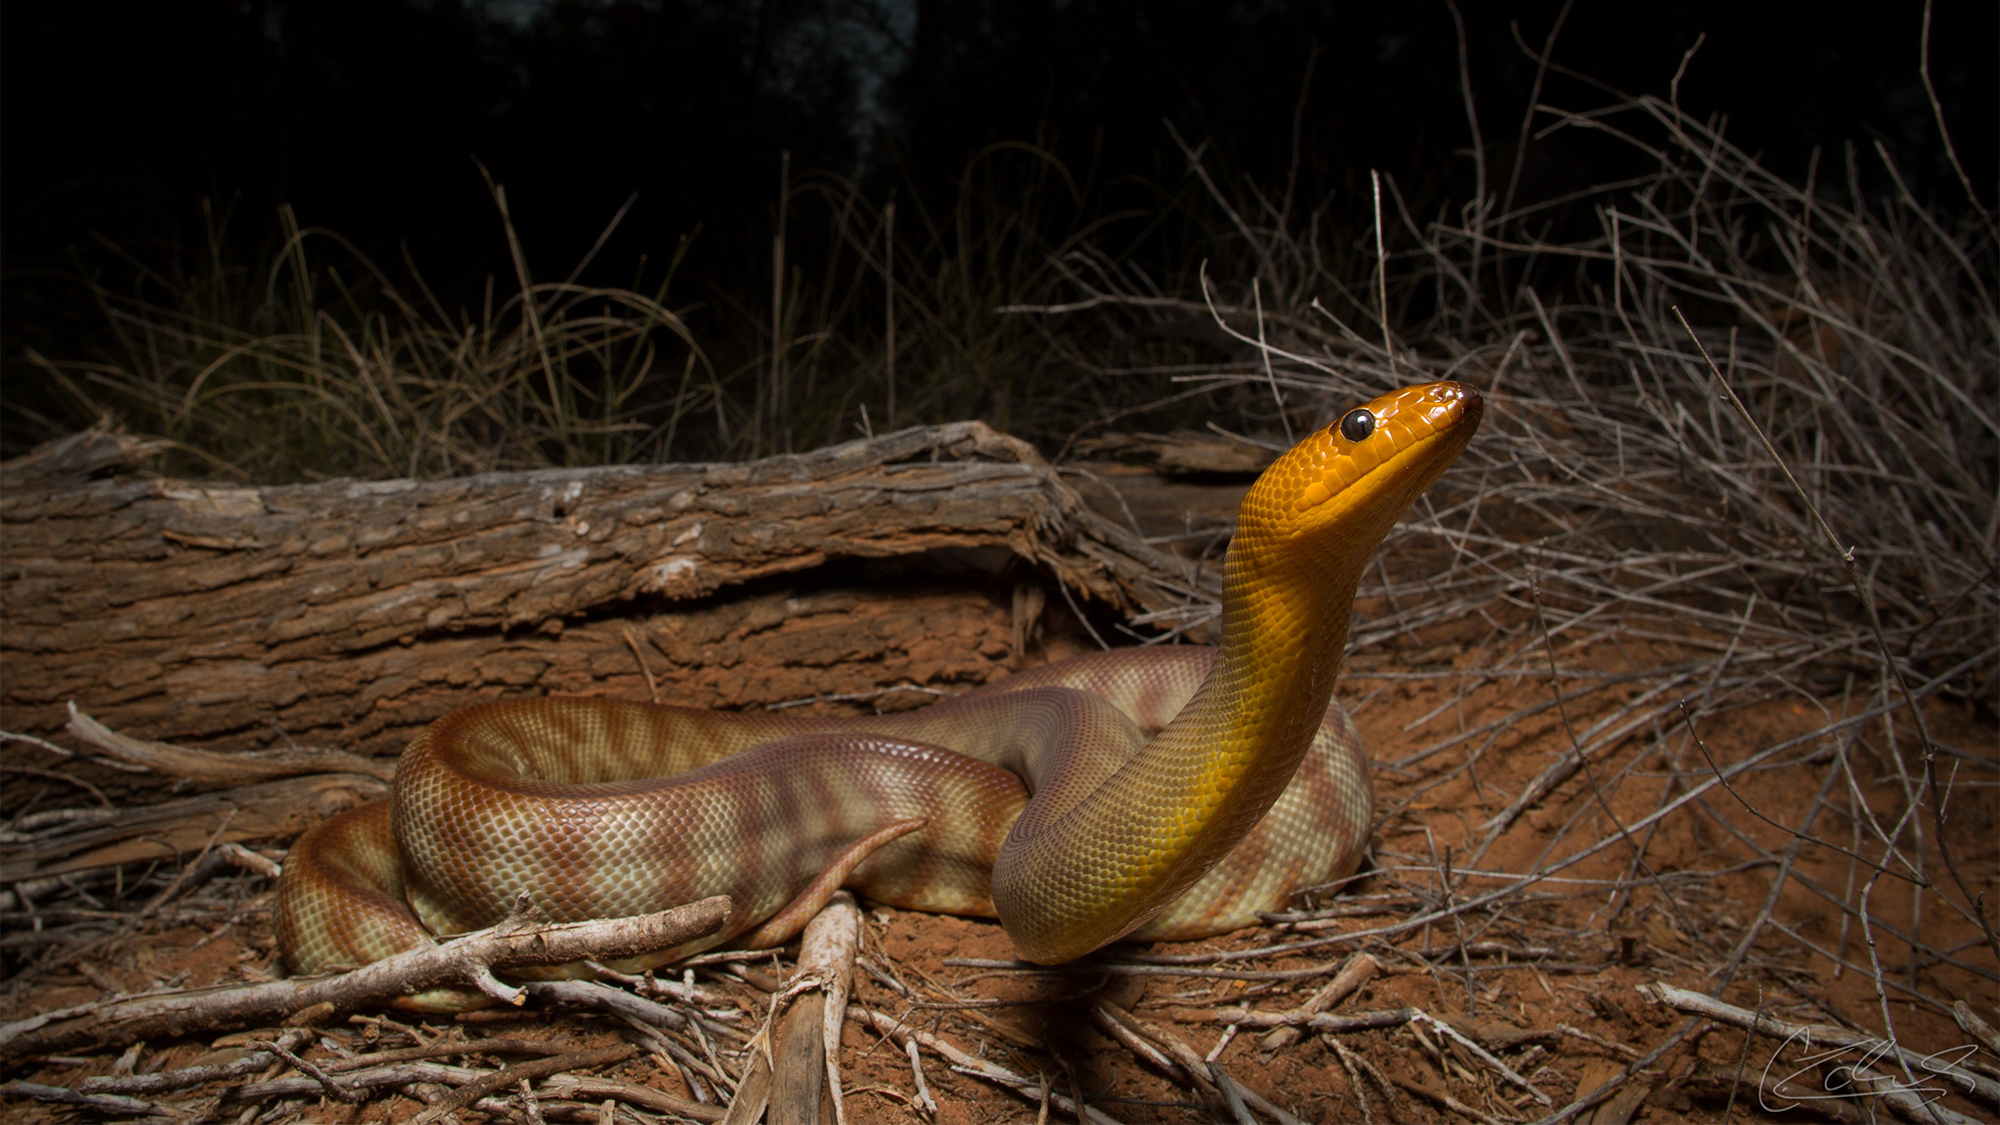 A woma pythron, a large, nocturnal species of snake on the ground by a piece of wood.